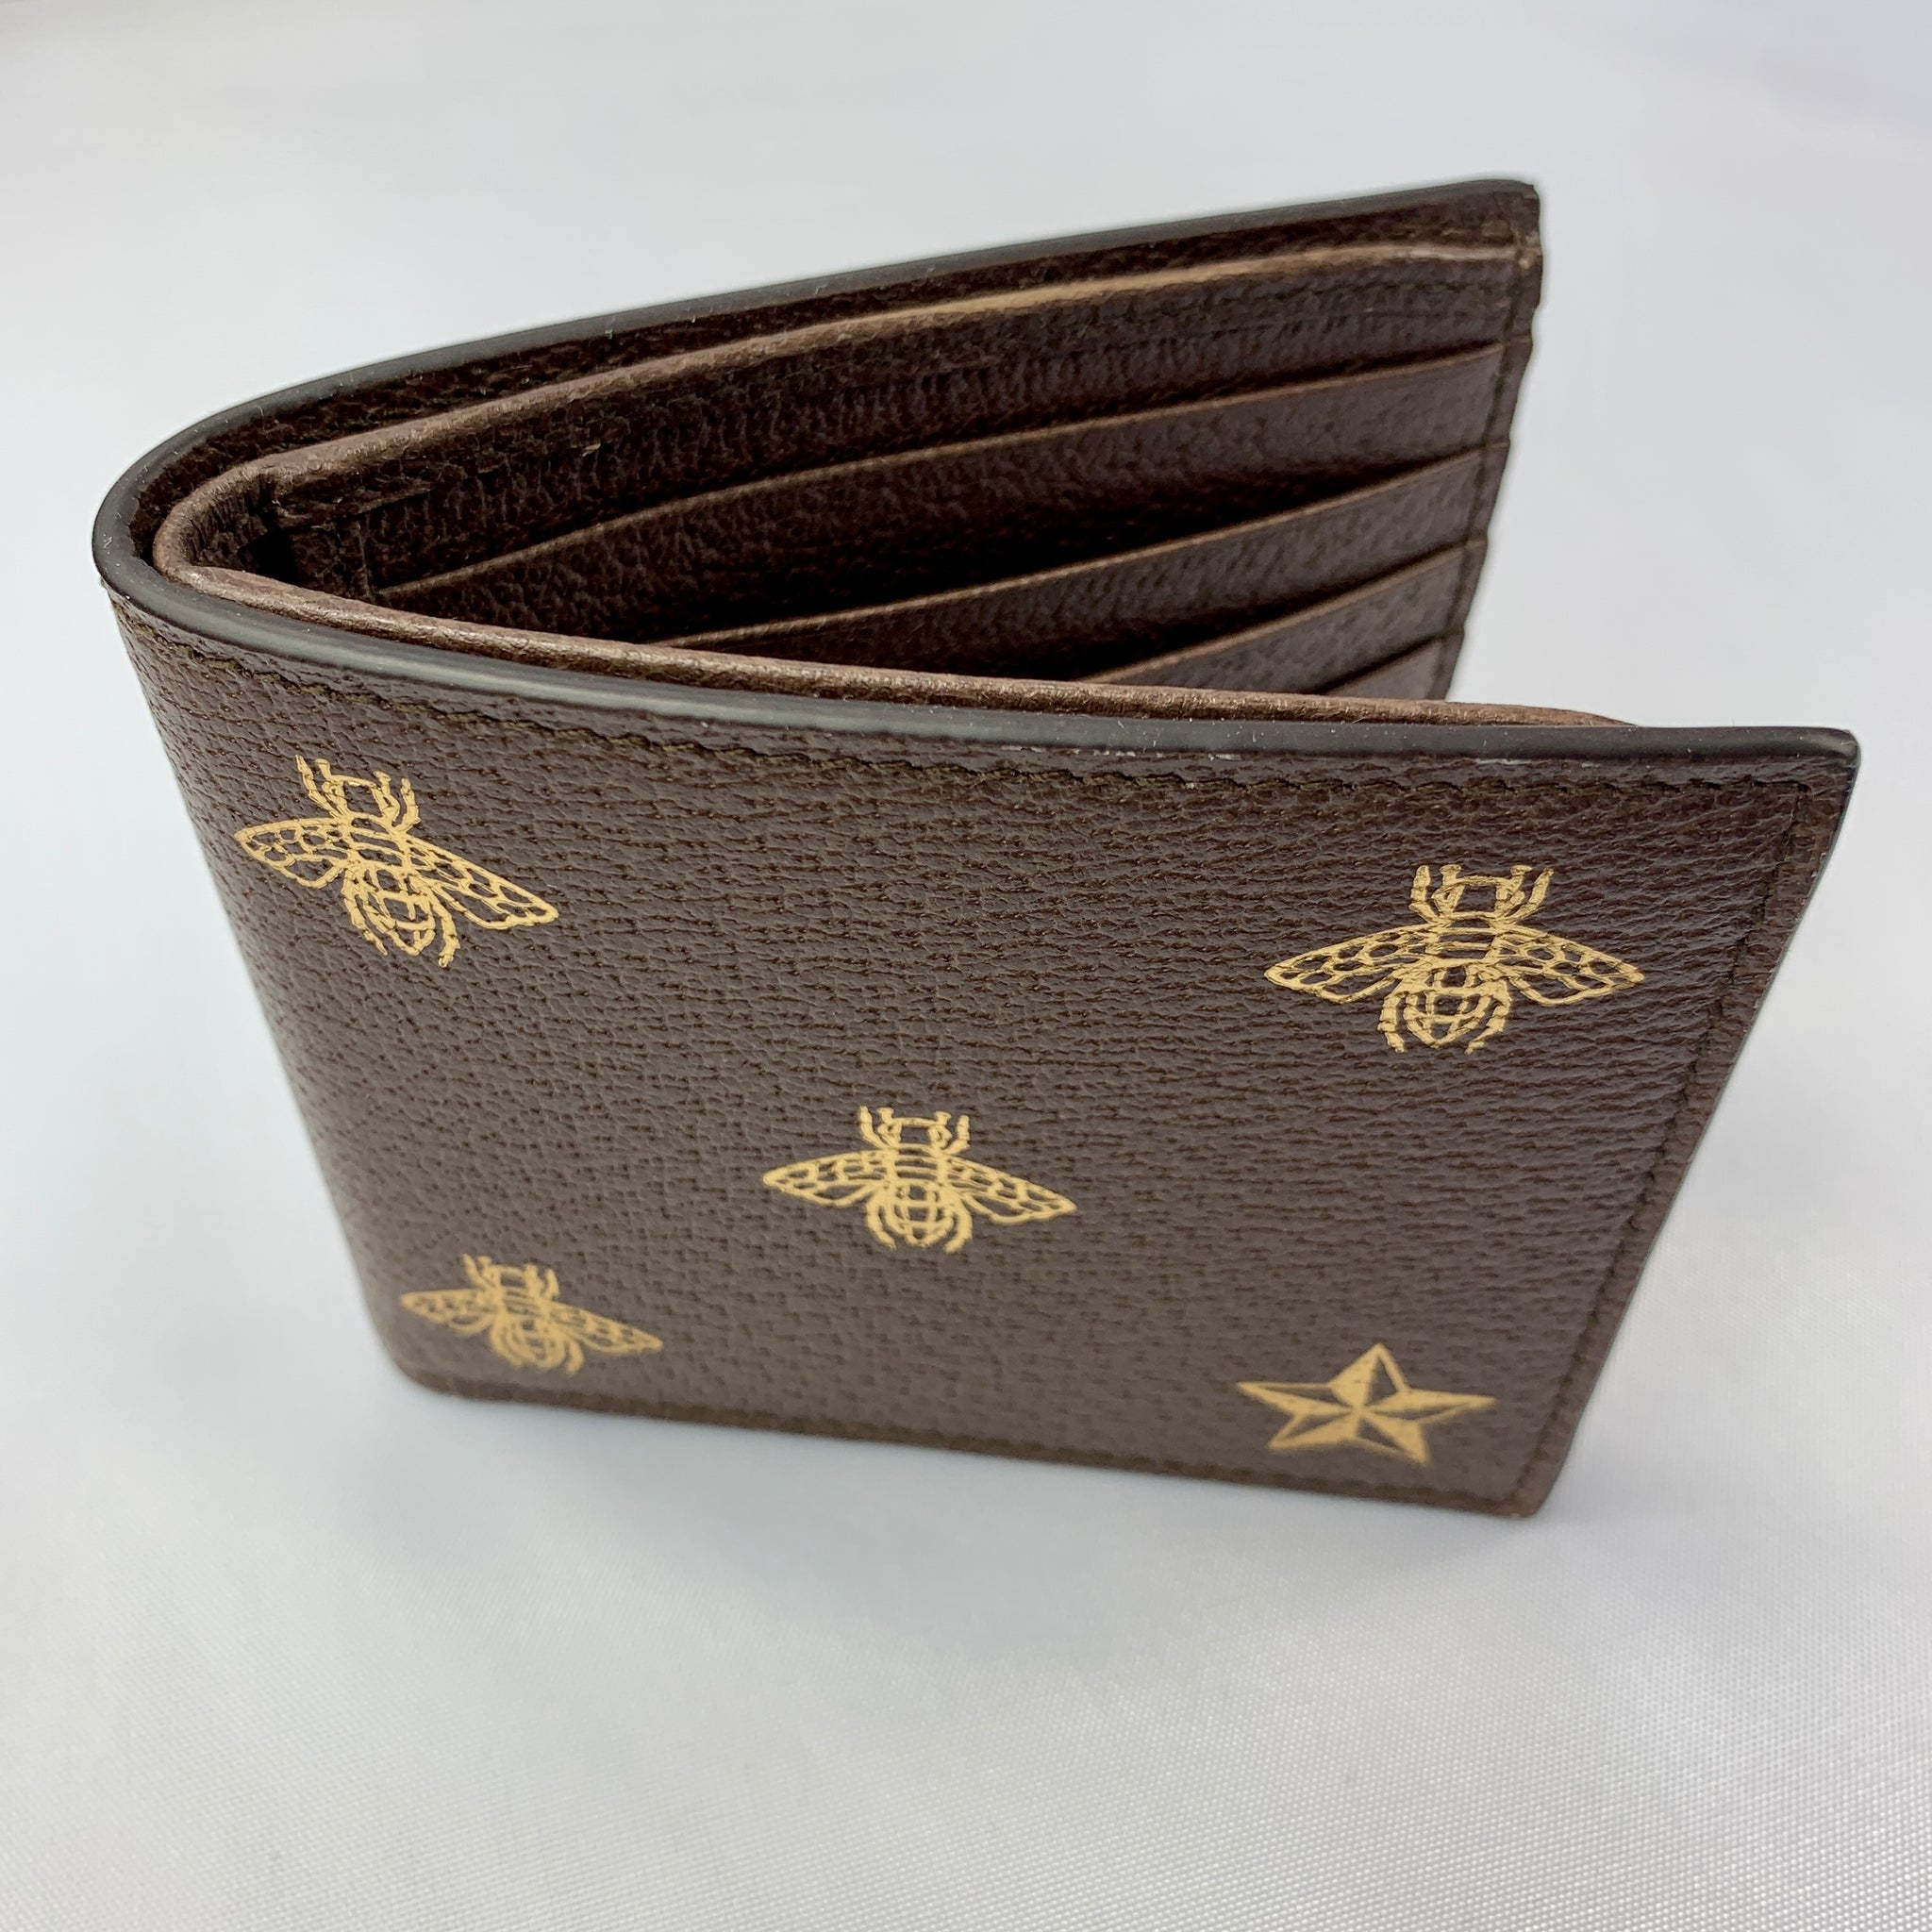 Gucci Bee Bifold Wallet